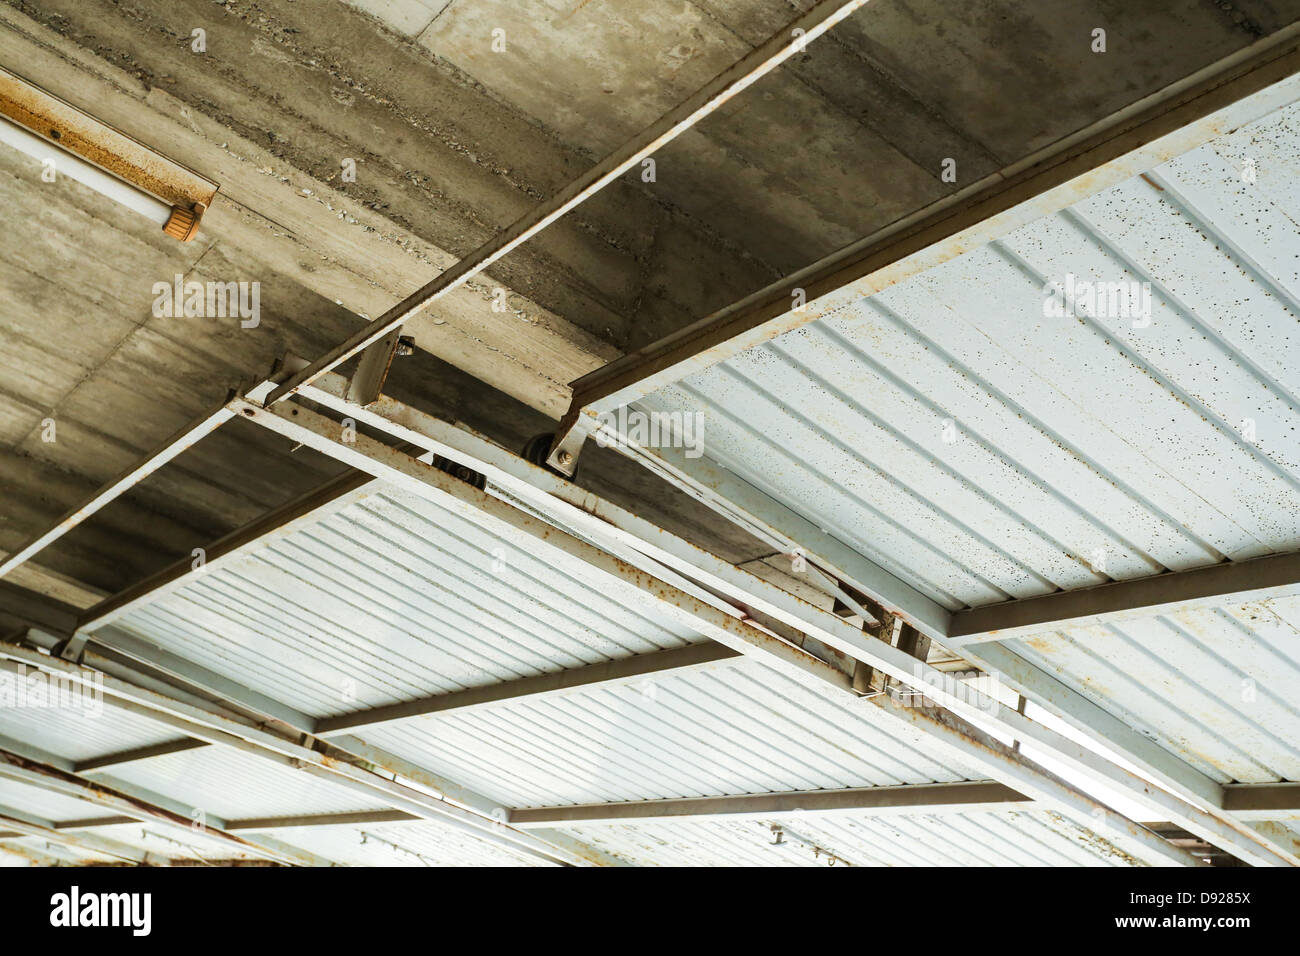 A Industrial Garage Ceiling With Open Gates Stock Photo 57213350